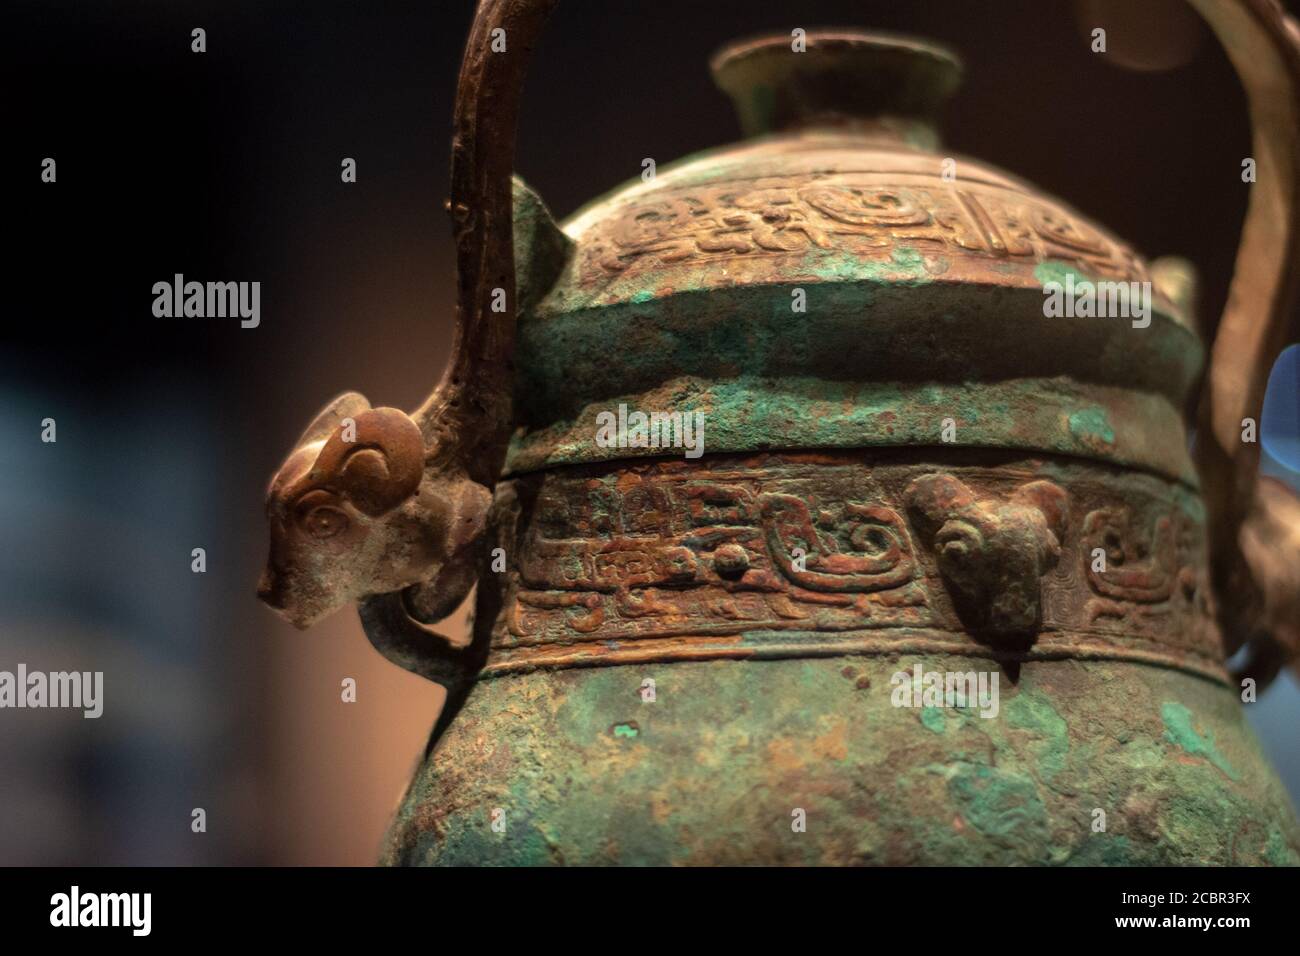 Luoyang, Henan Province / China - January 5, 2016: Ancient Chinese bronze vessel (Ding) exhibited in Luoyang museum, Luoyang, China Stock Photo